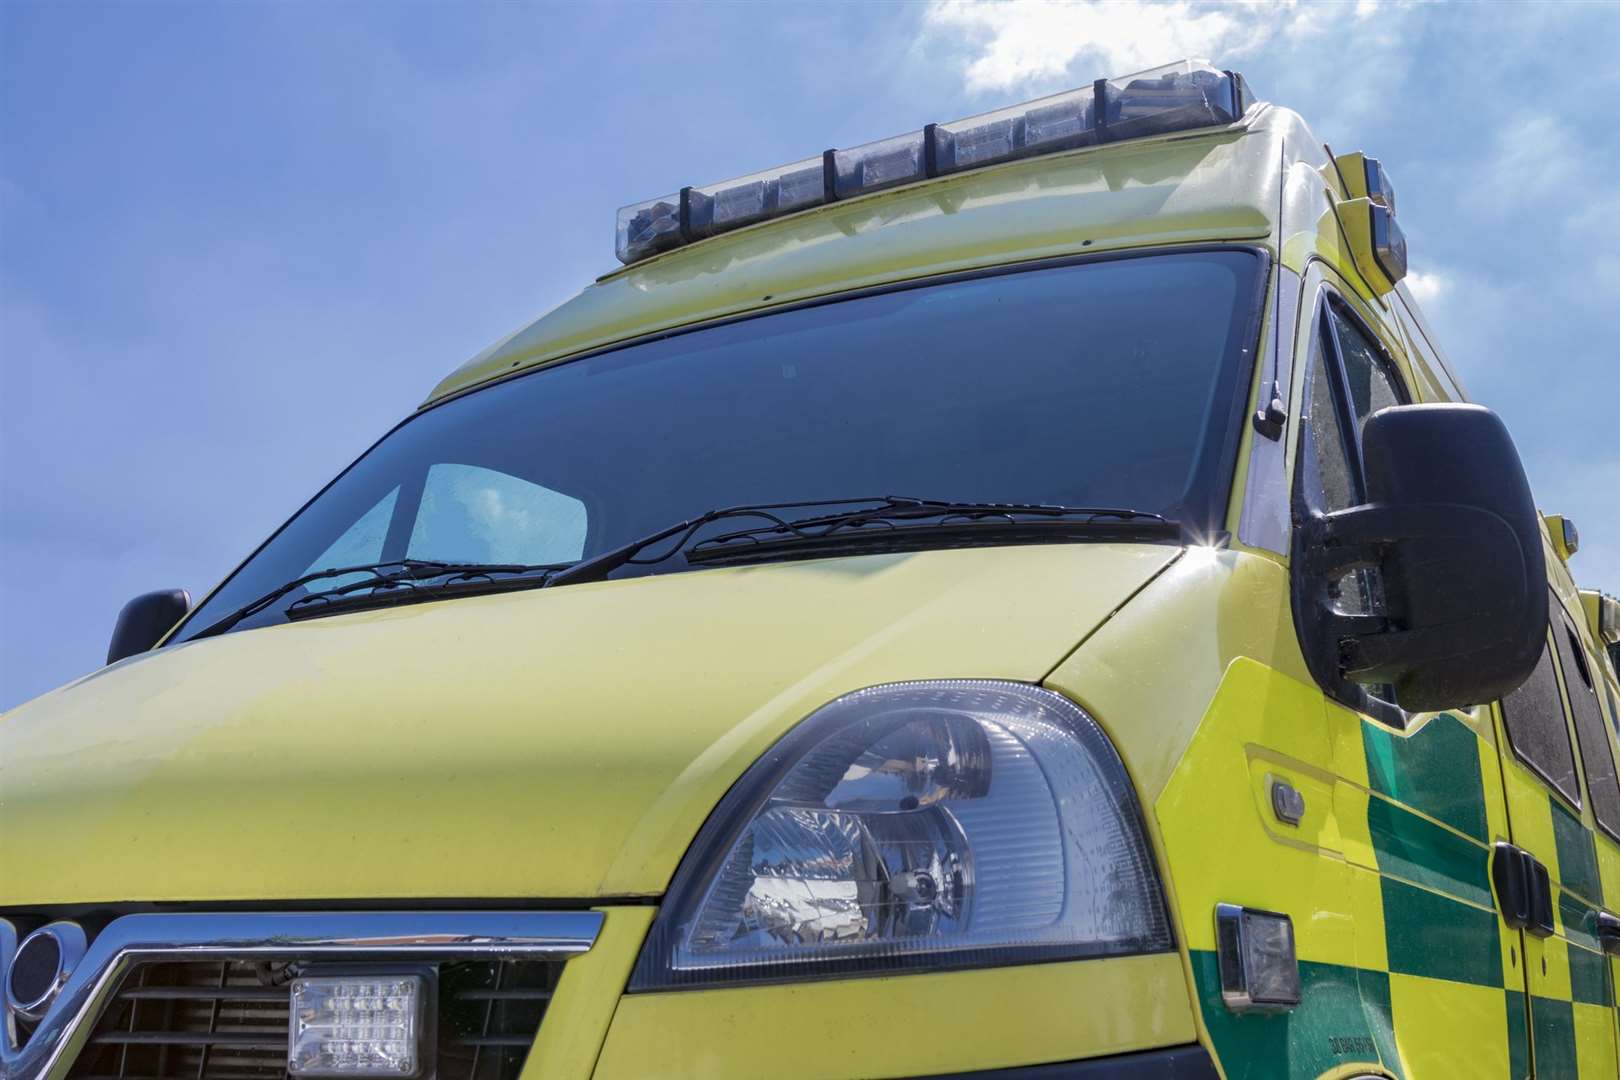 Ambulance crews fought to save the man's life